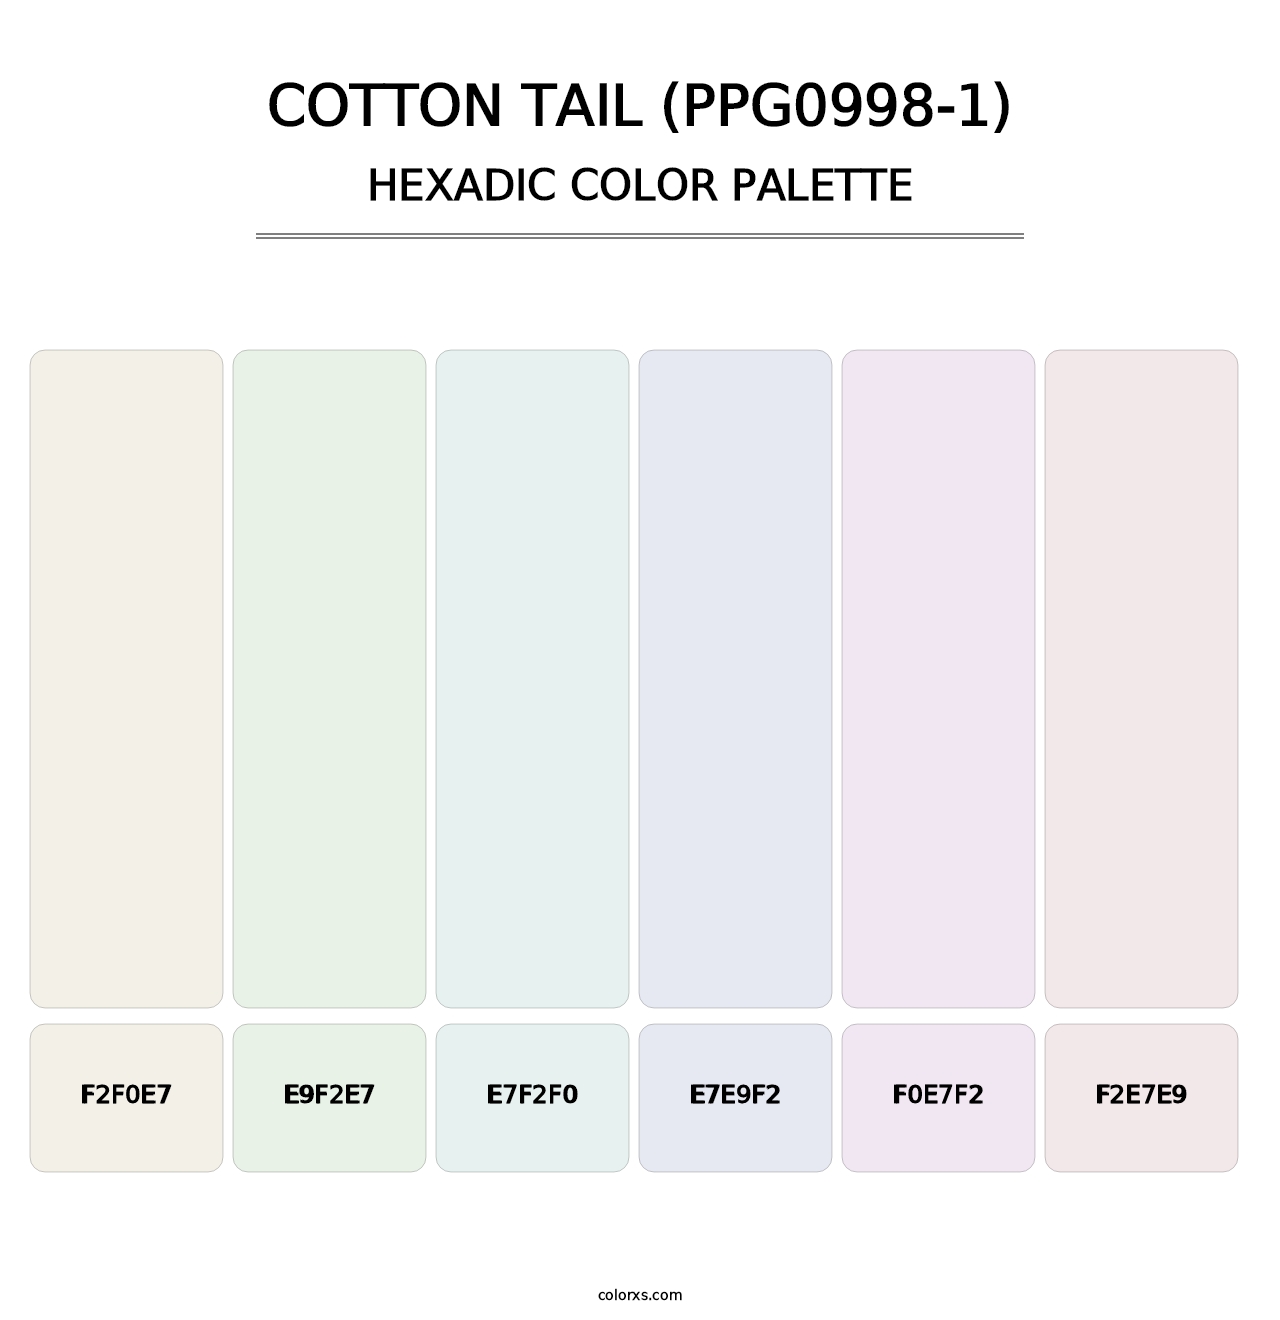 Cotton Tail (PPG0998-1) - Hexadic Color Palette